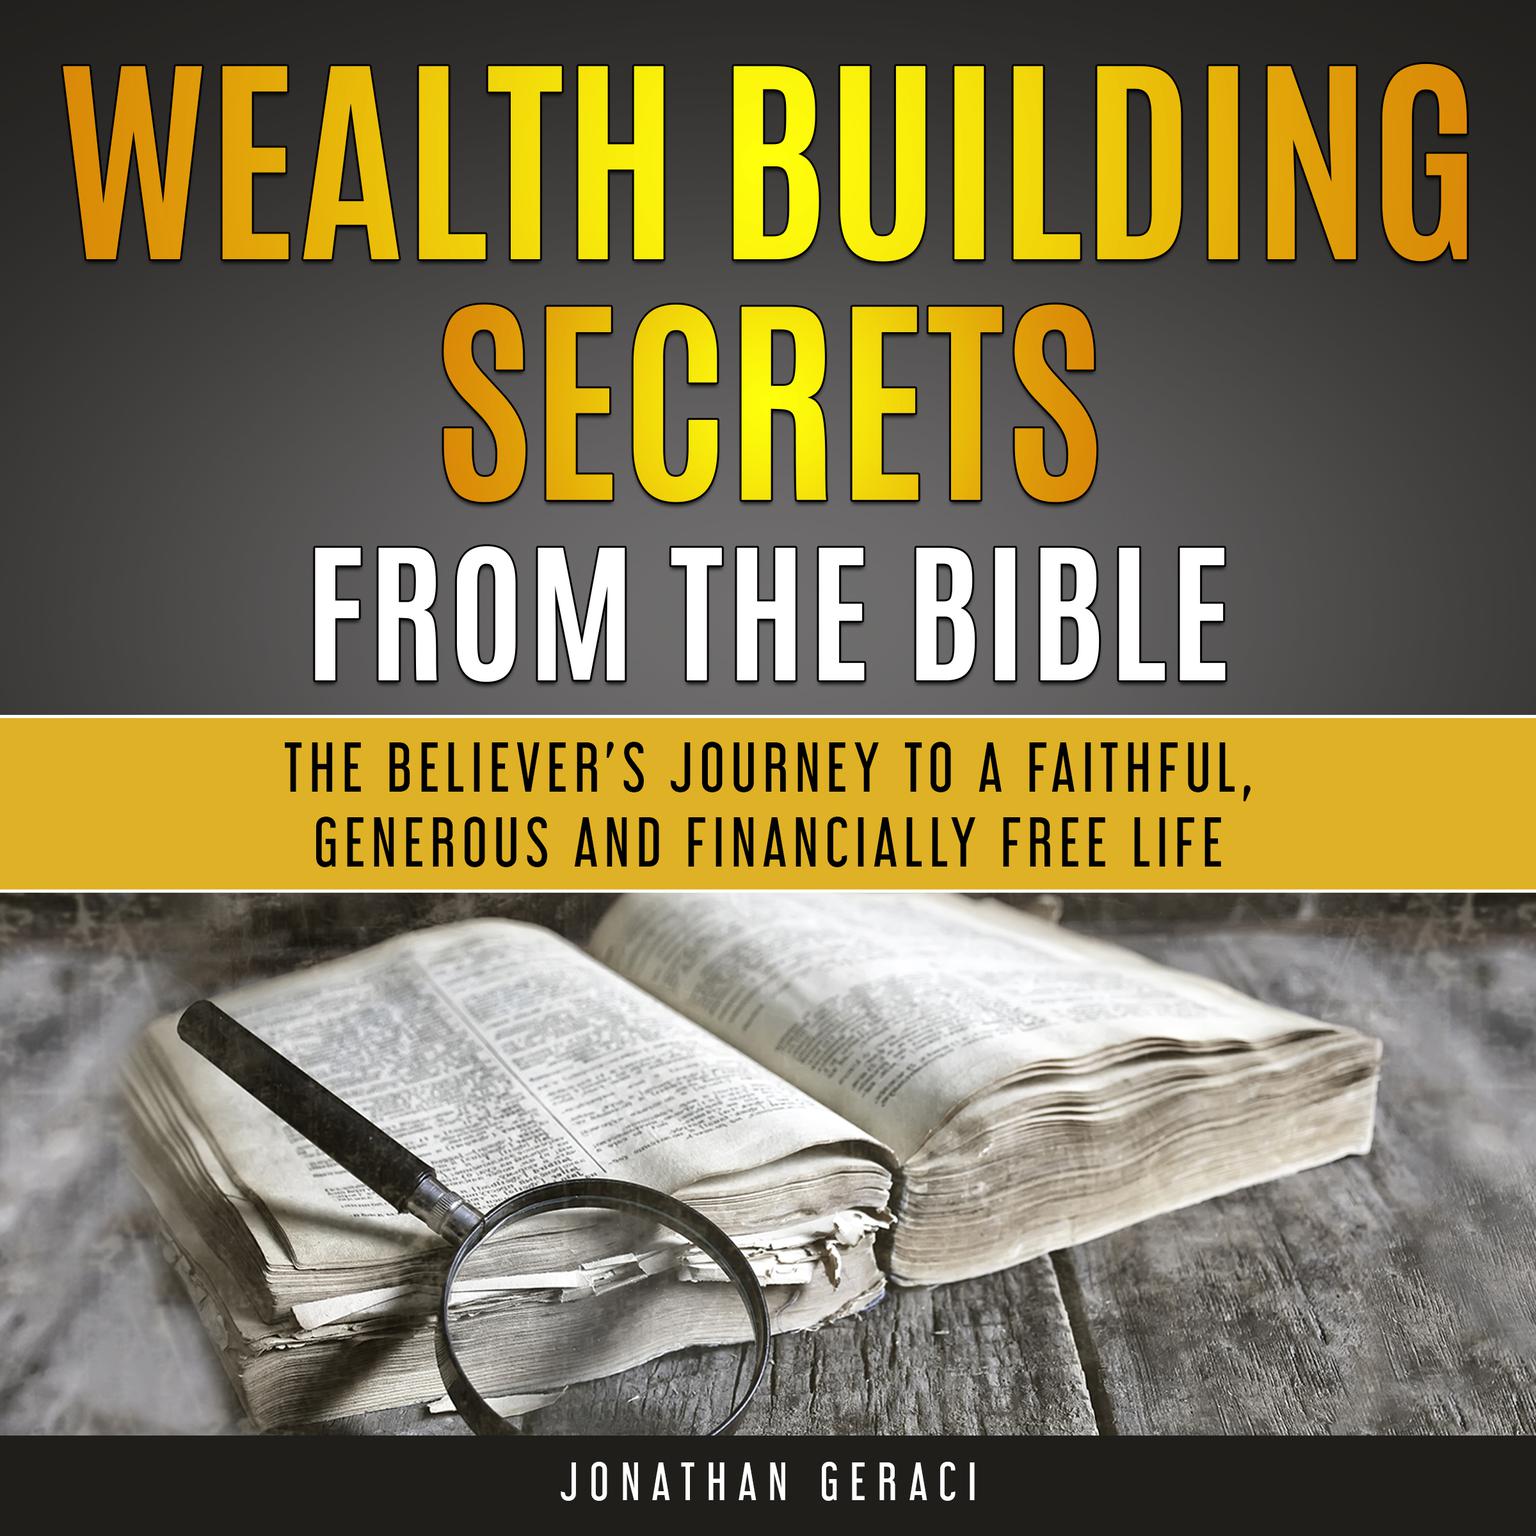 Wealth Building Secrets from the Bible: The Believer’s Journey to a Faithful, Generous and Financially Free Life Audiobook, by Jonathan Geraci